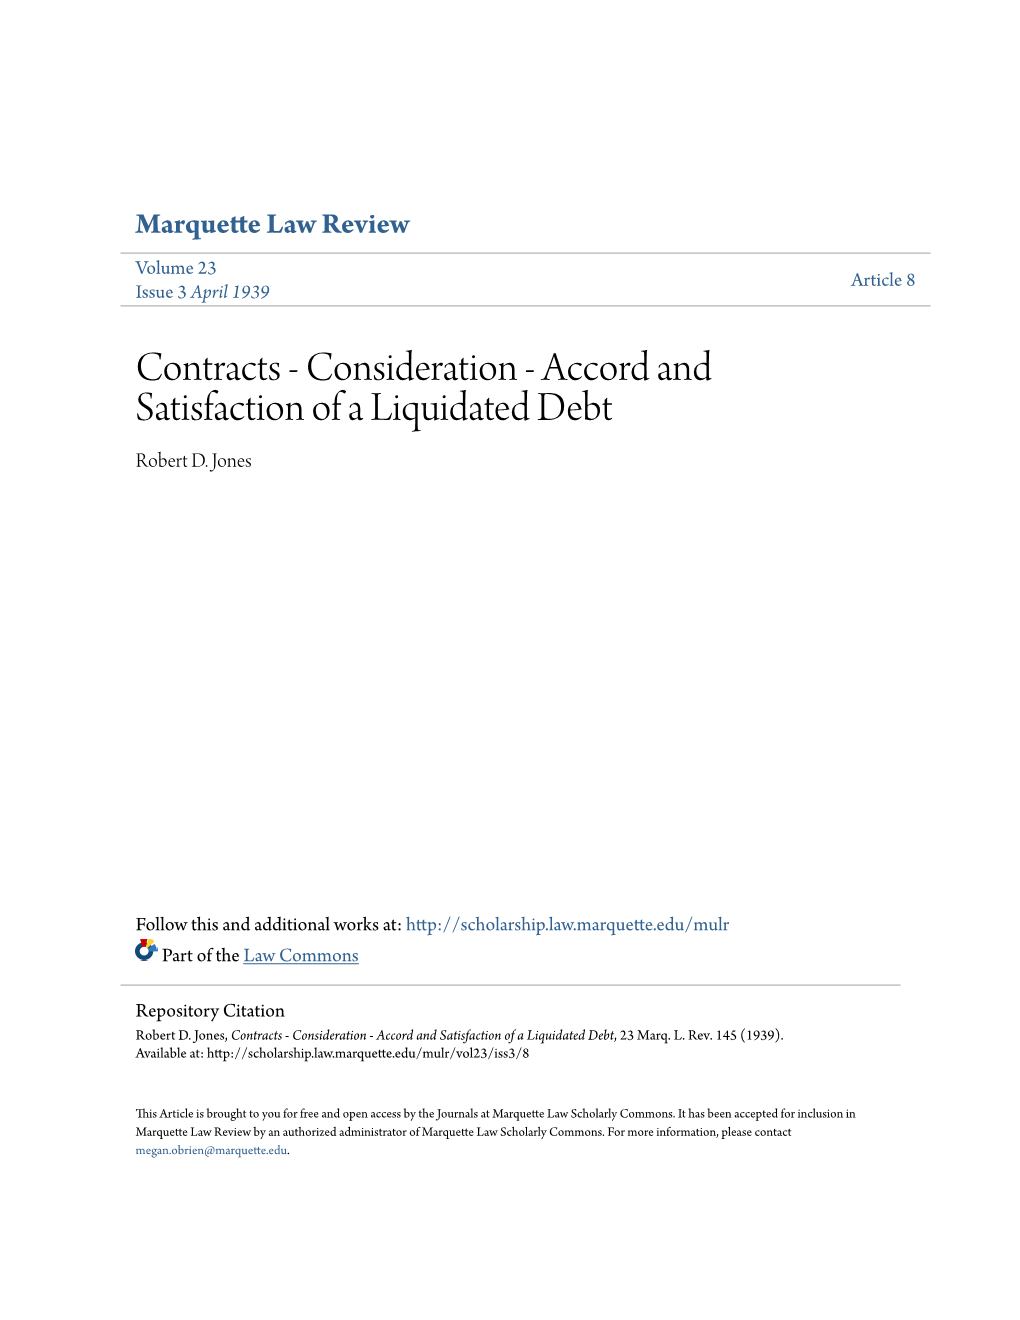 Contracts - Consideration - Accord and Satisfaction of a Liquidated Debt Robert D